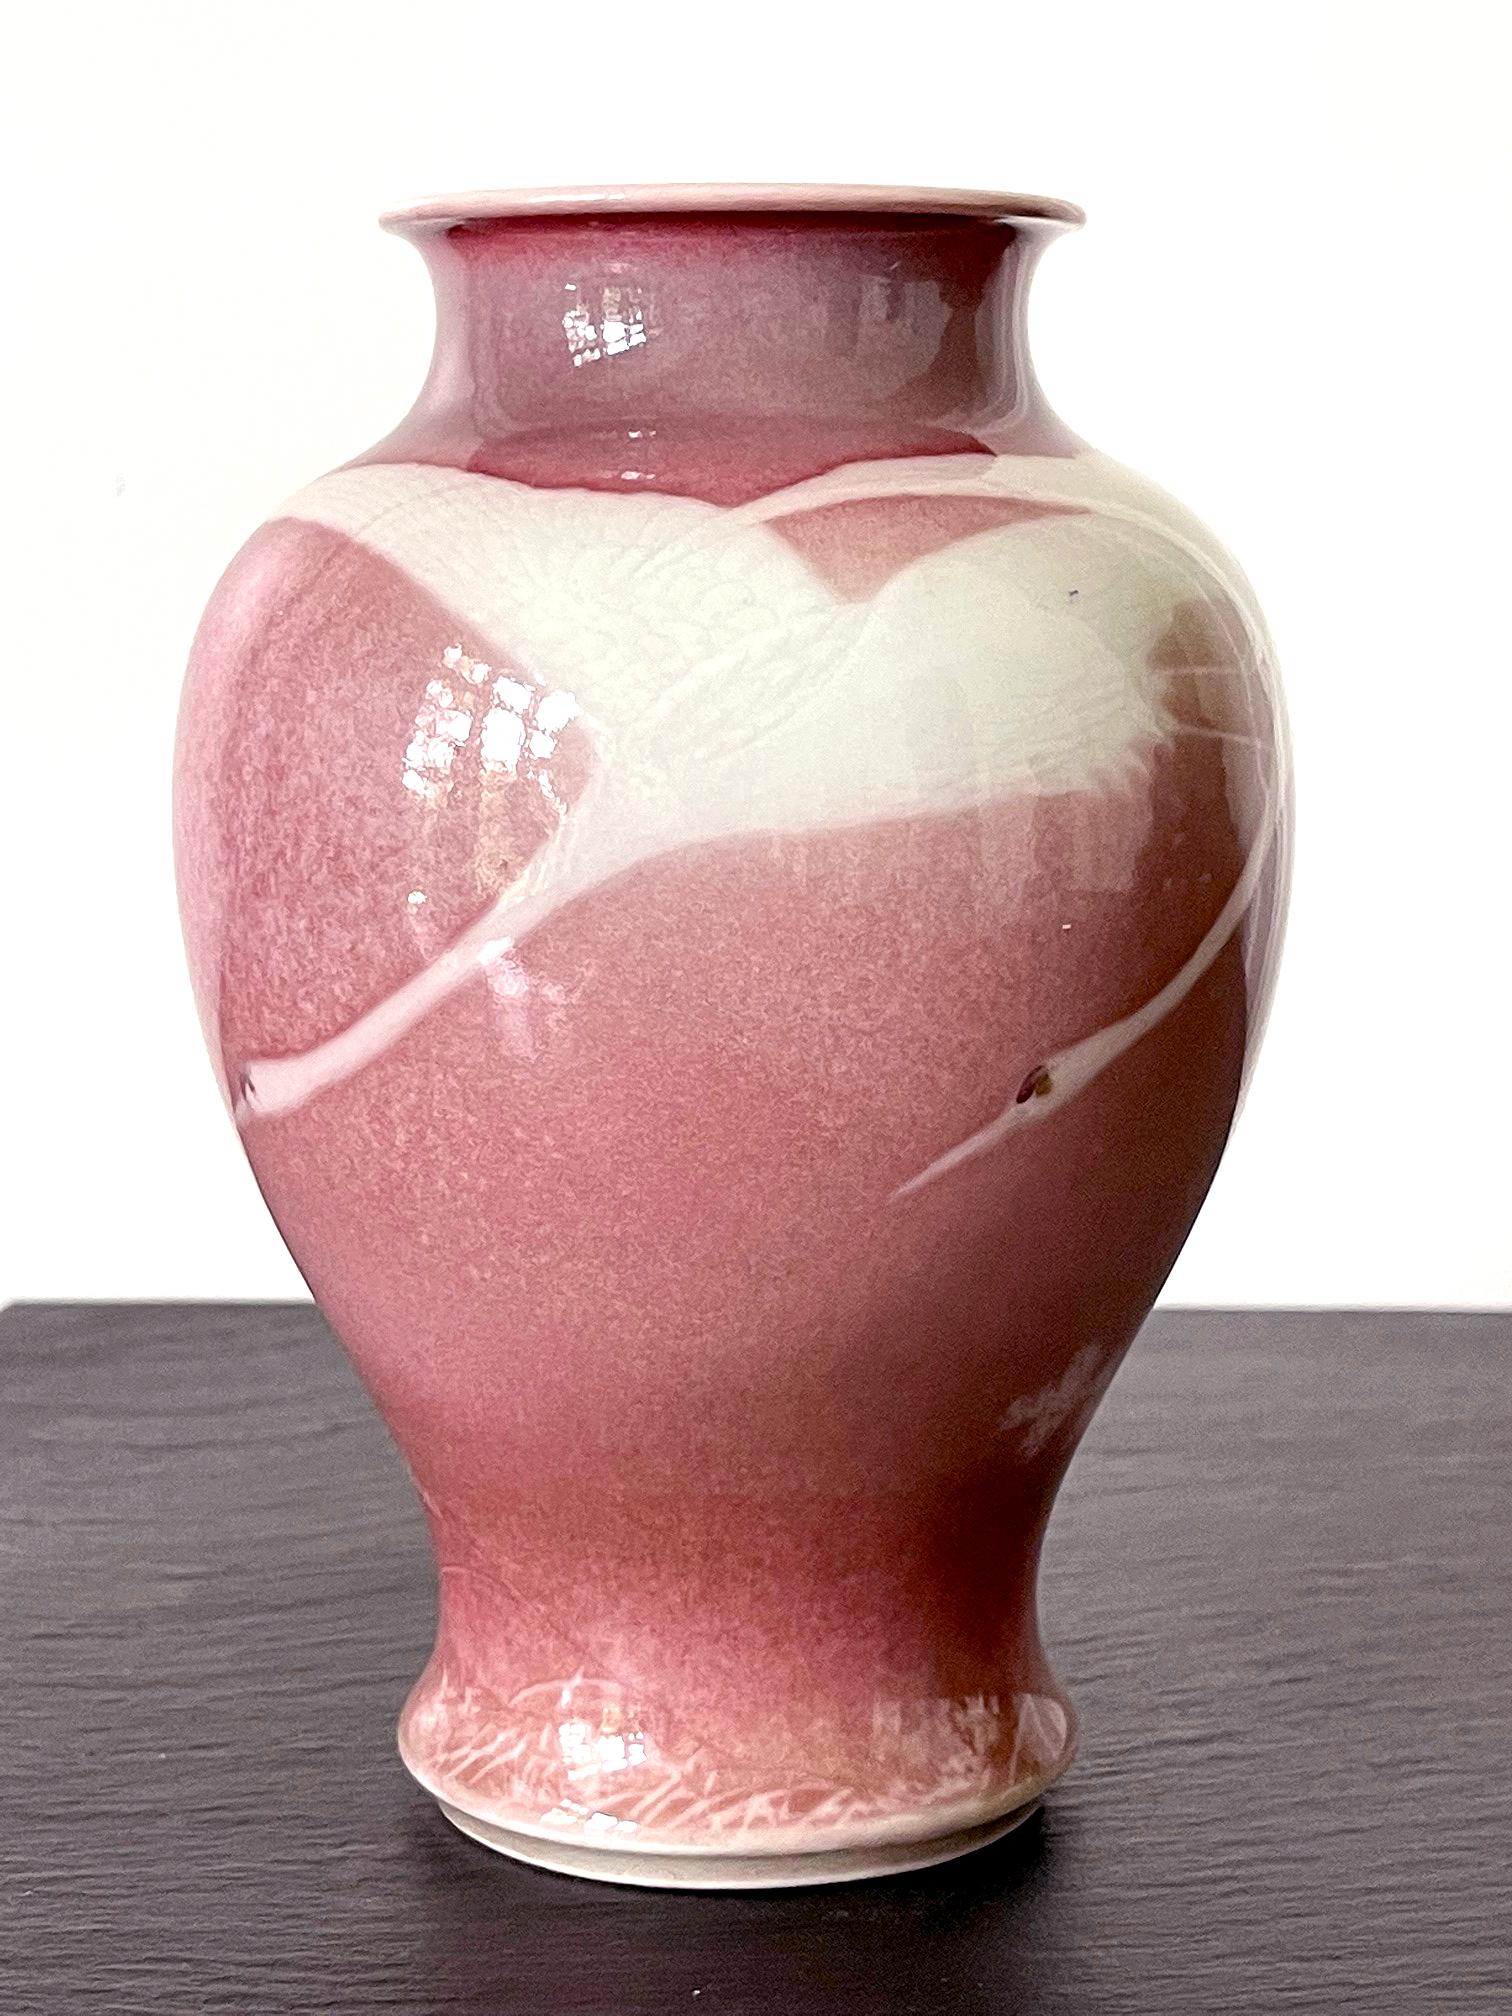 A small porcelain vase by Japanese Meiji imperial potter Makuzu Kozan (1842-1916), circa 1890-1910s. The vase is made in what is considered early phase of his underglaze period during late Meiji era. In a classic baluster form, the surface of the